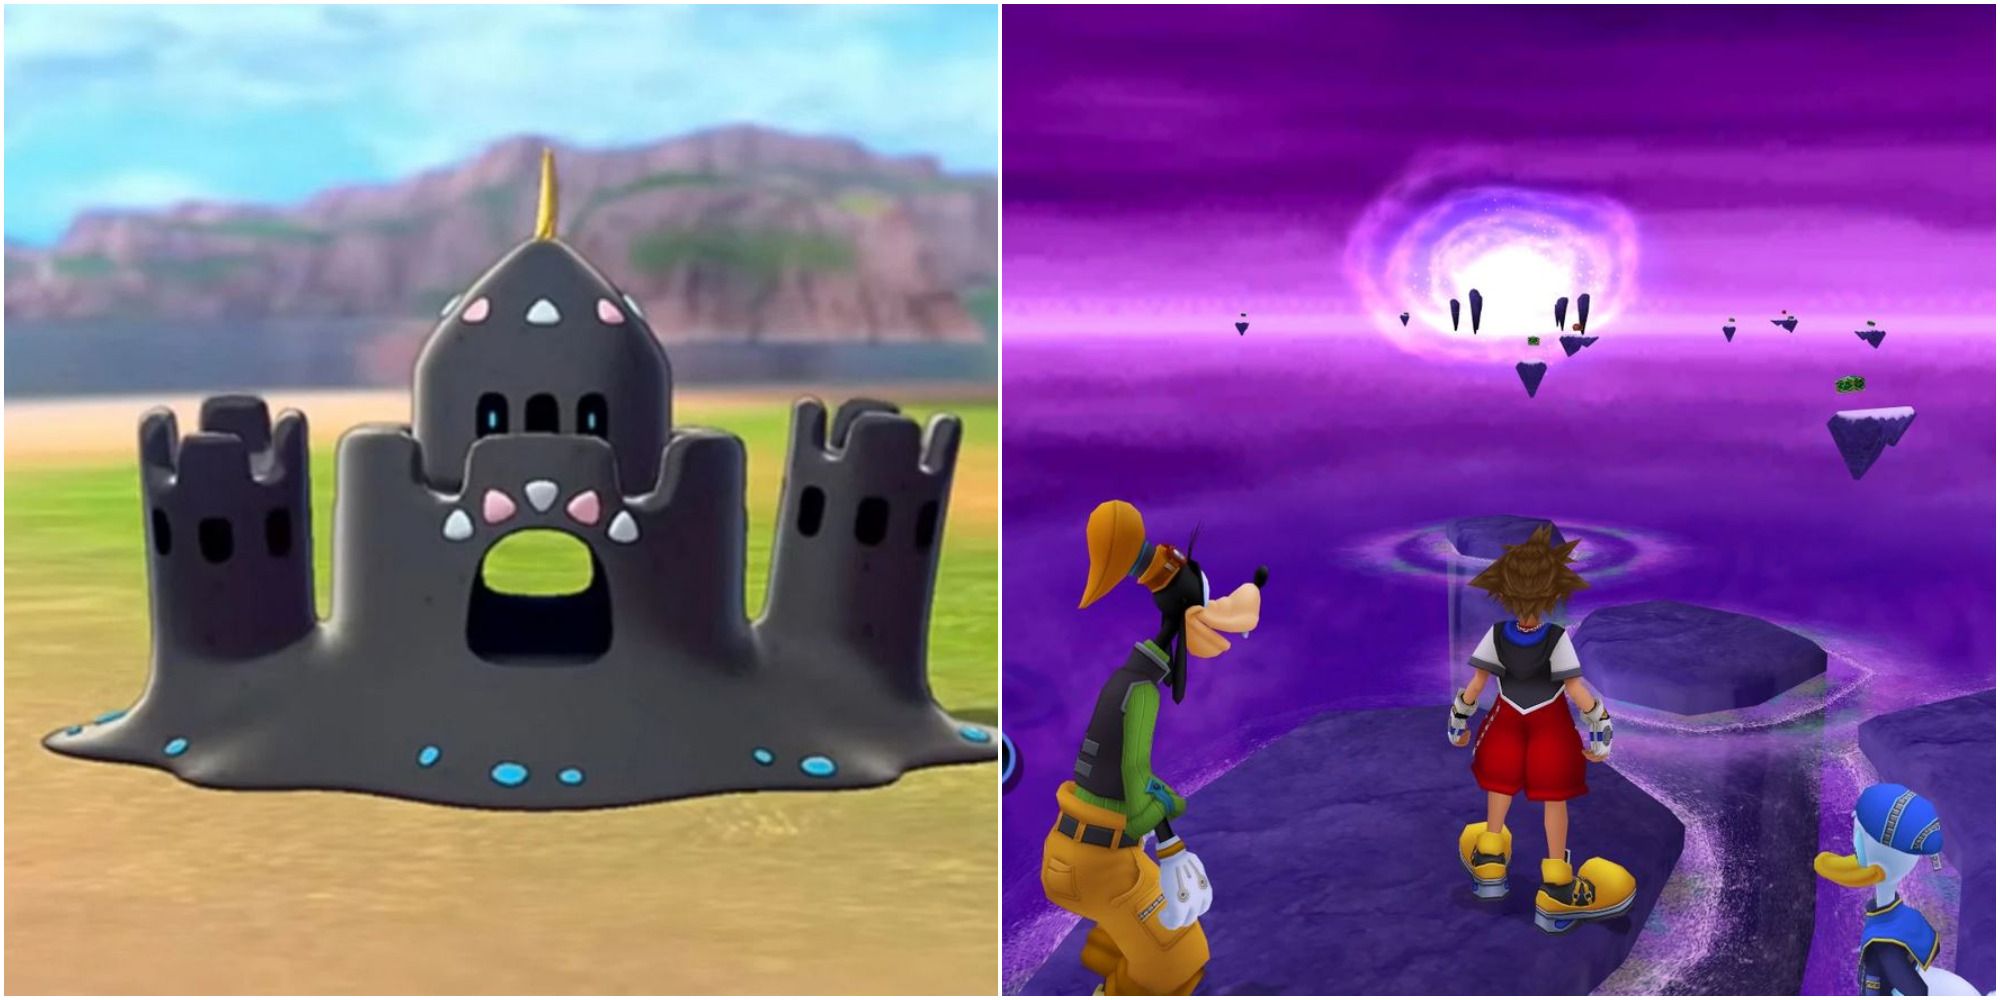 Shiny Sandygast in Pokemon and Sora, Donald, and Goofy in End of the World in Kingdom Hearts